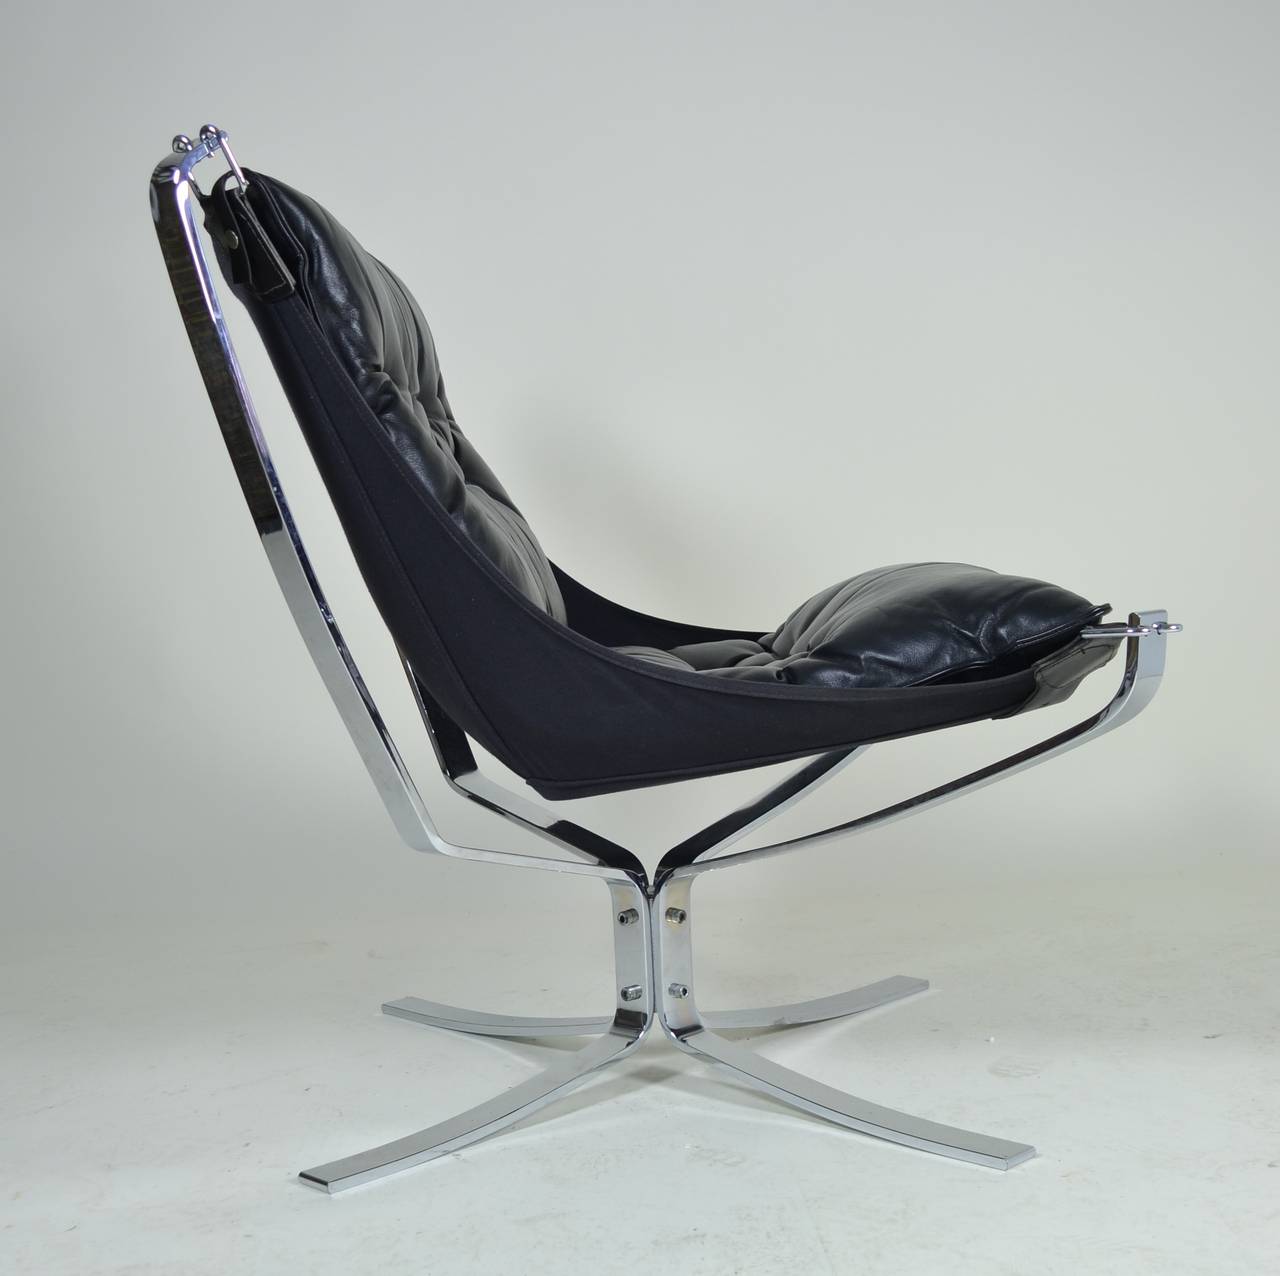 Designed for Vatne Mobler by Sigurd Resell in 1974, the Falcon chair. Super comfortable. This example is in excellent condition. Black leather upholstery and heavy chrome base.